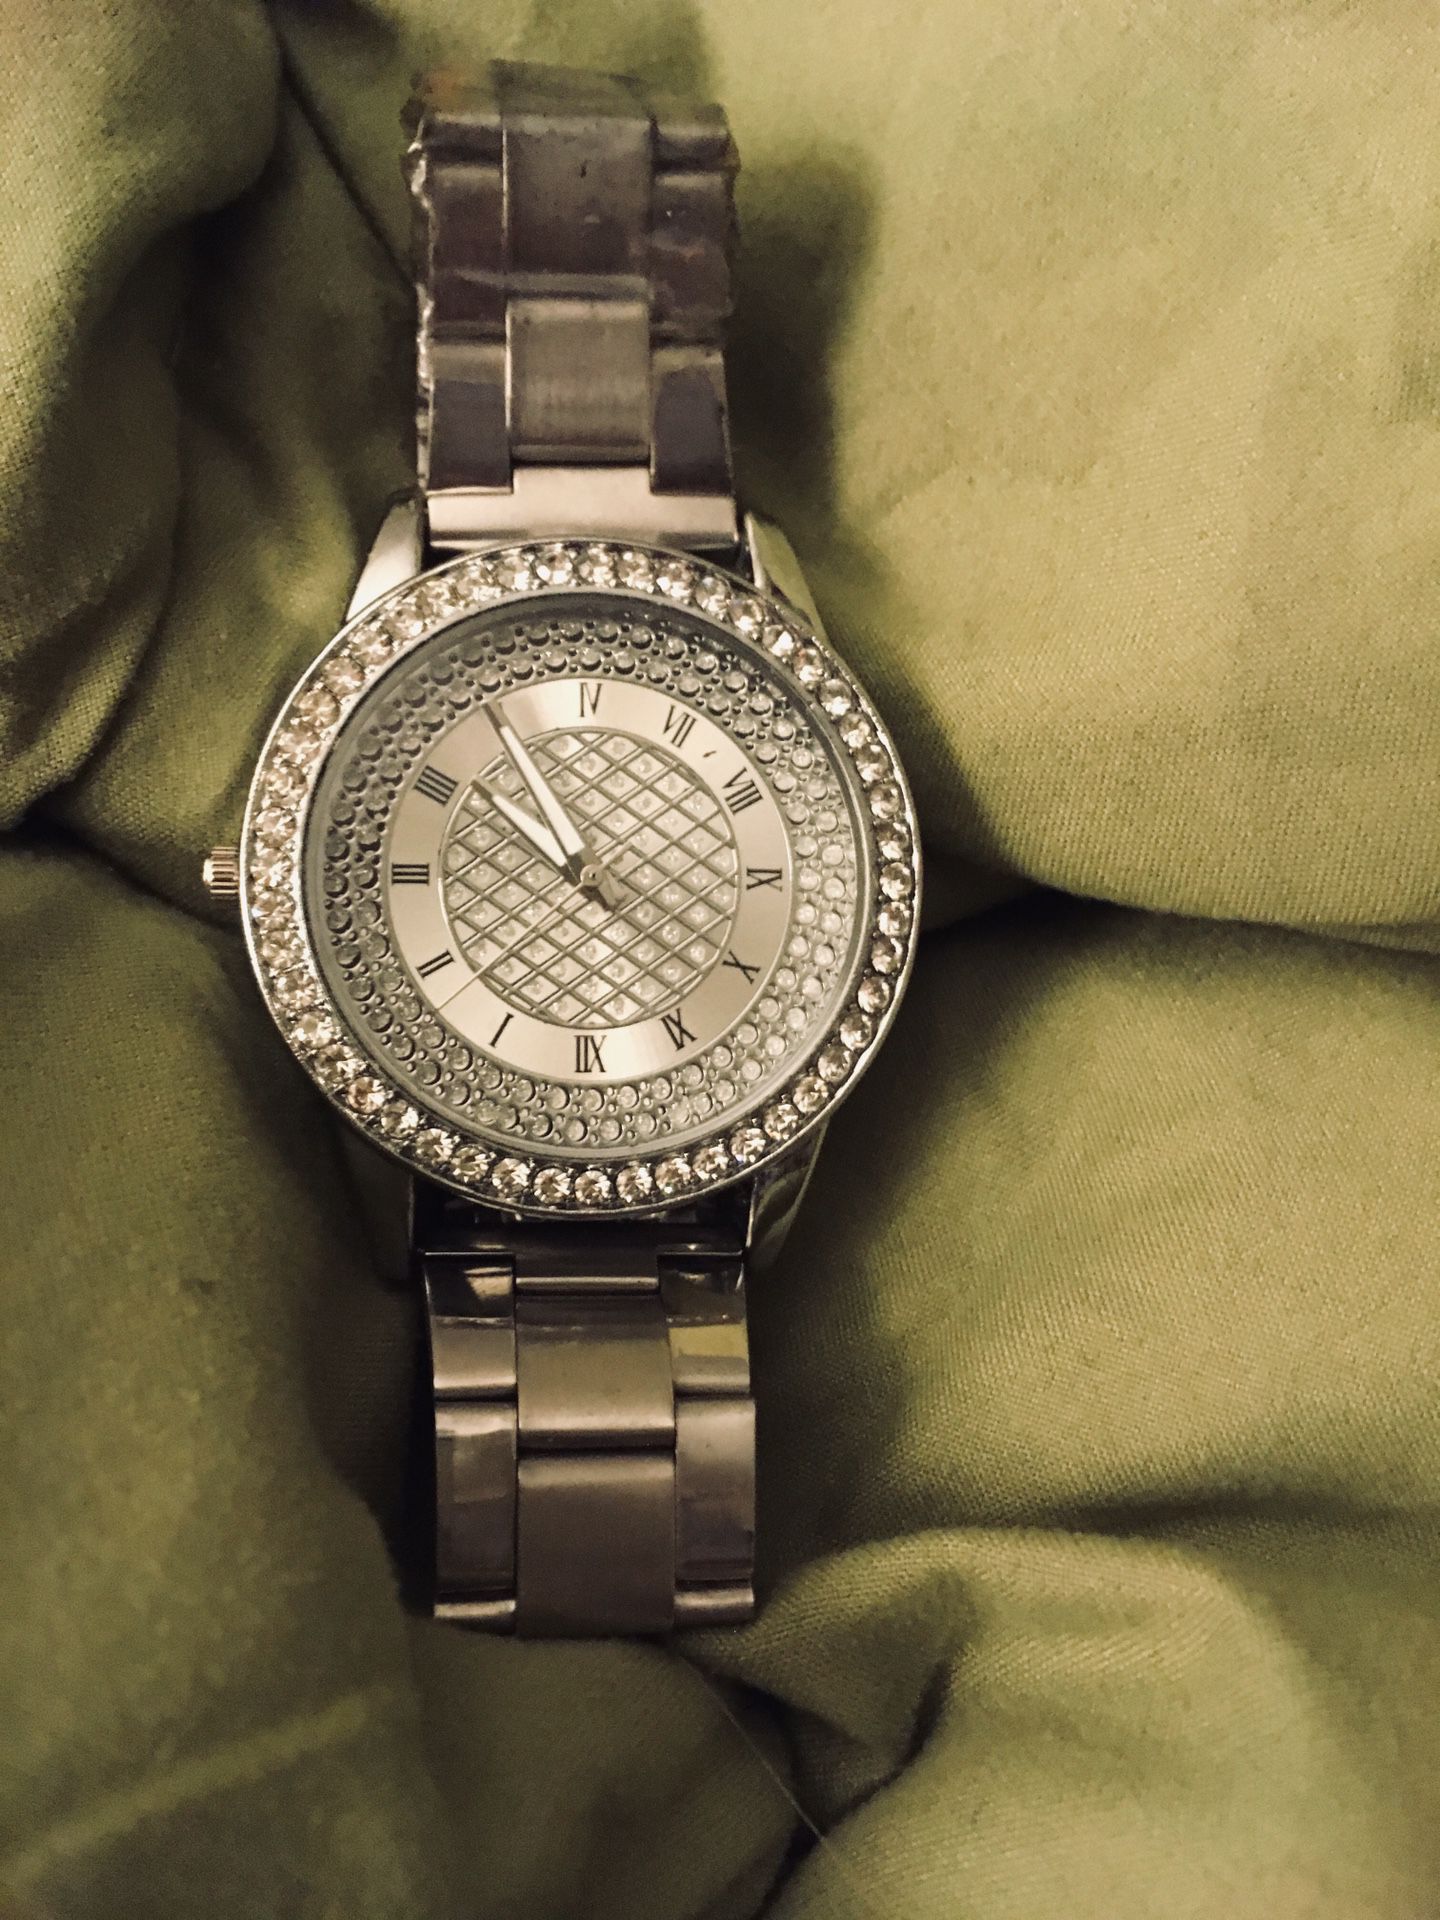 Brand New Watch, Never Worn , no maker listed ,